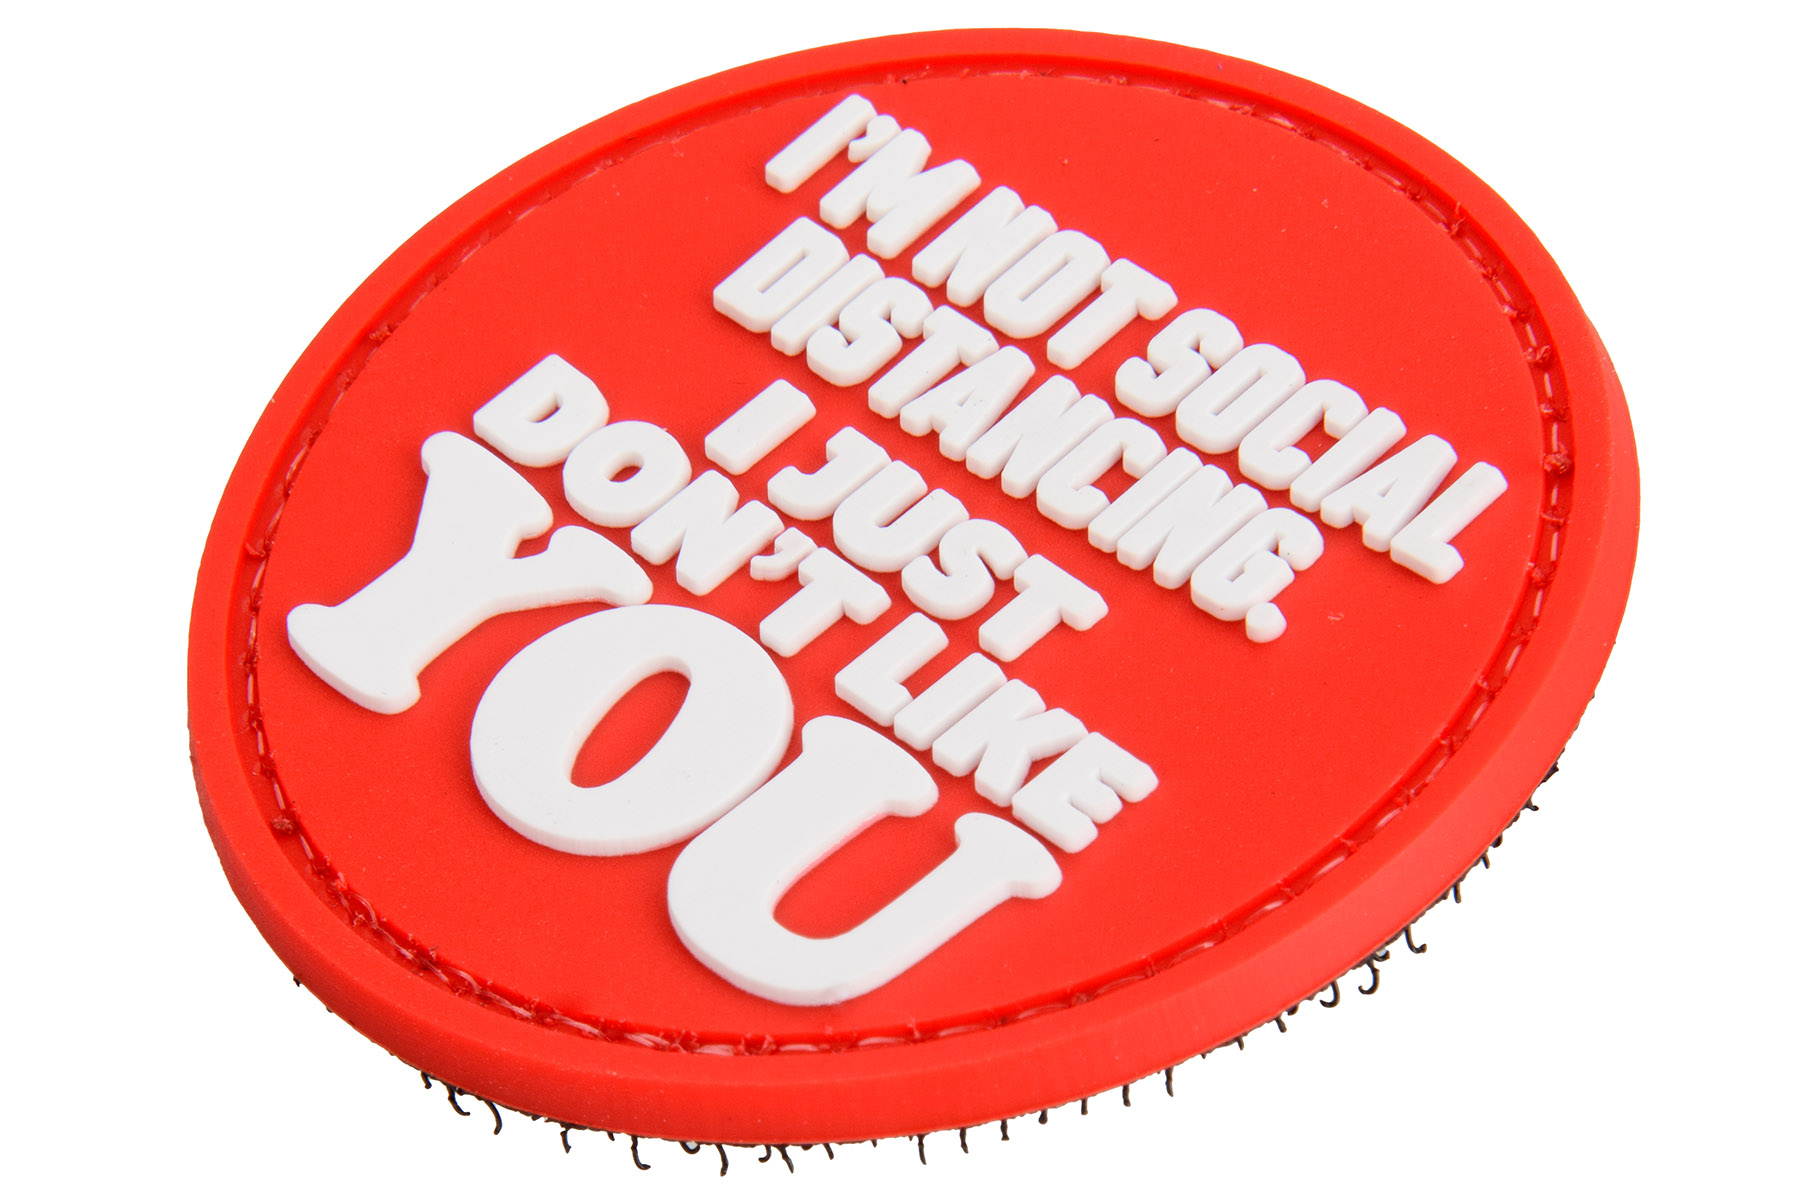 "I'm Not Social Distancing. I Just Don't Like YOU" PVC Morale Patch (Red) - Click Image to Close